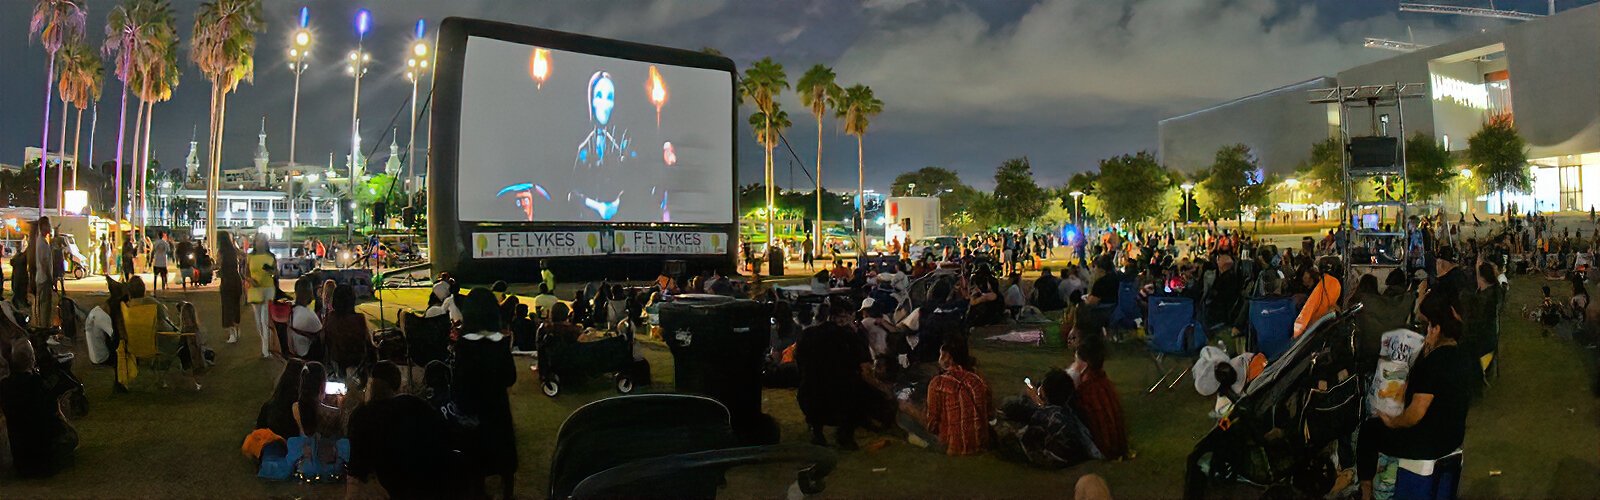  In partnership with the Tampa Theatre, Friends of the Riverwalk introduces Movie in the Park with a showing of  "The Addams Family" to conclude the Trick or Treat event at Curtis Hixon Waterfront Park in downtown Tampa.